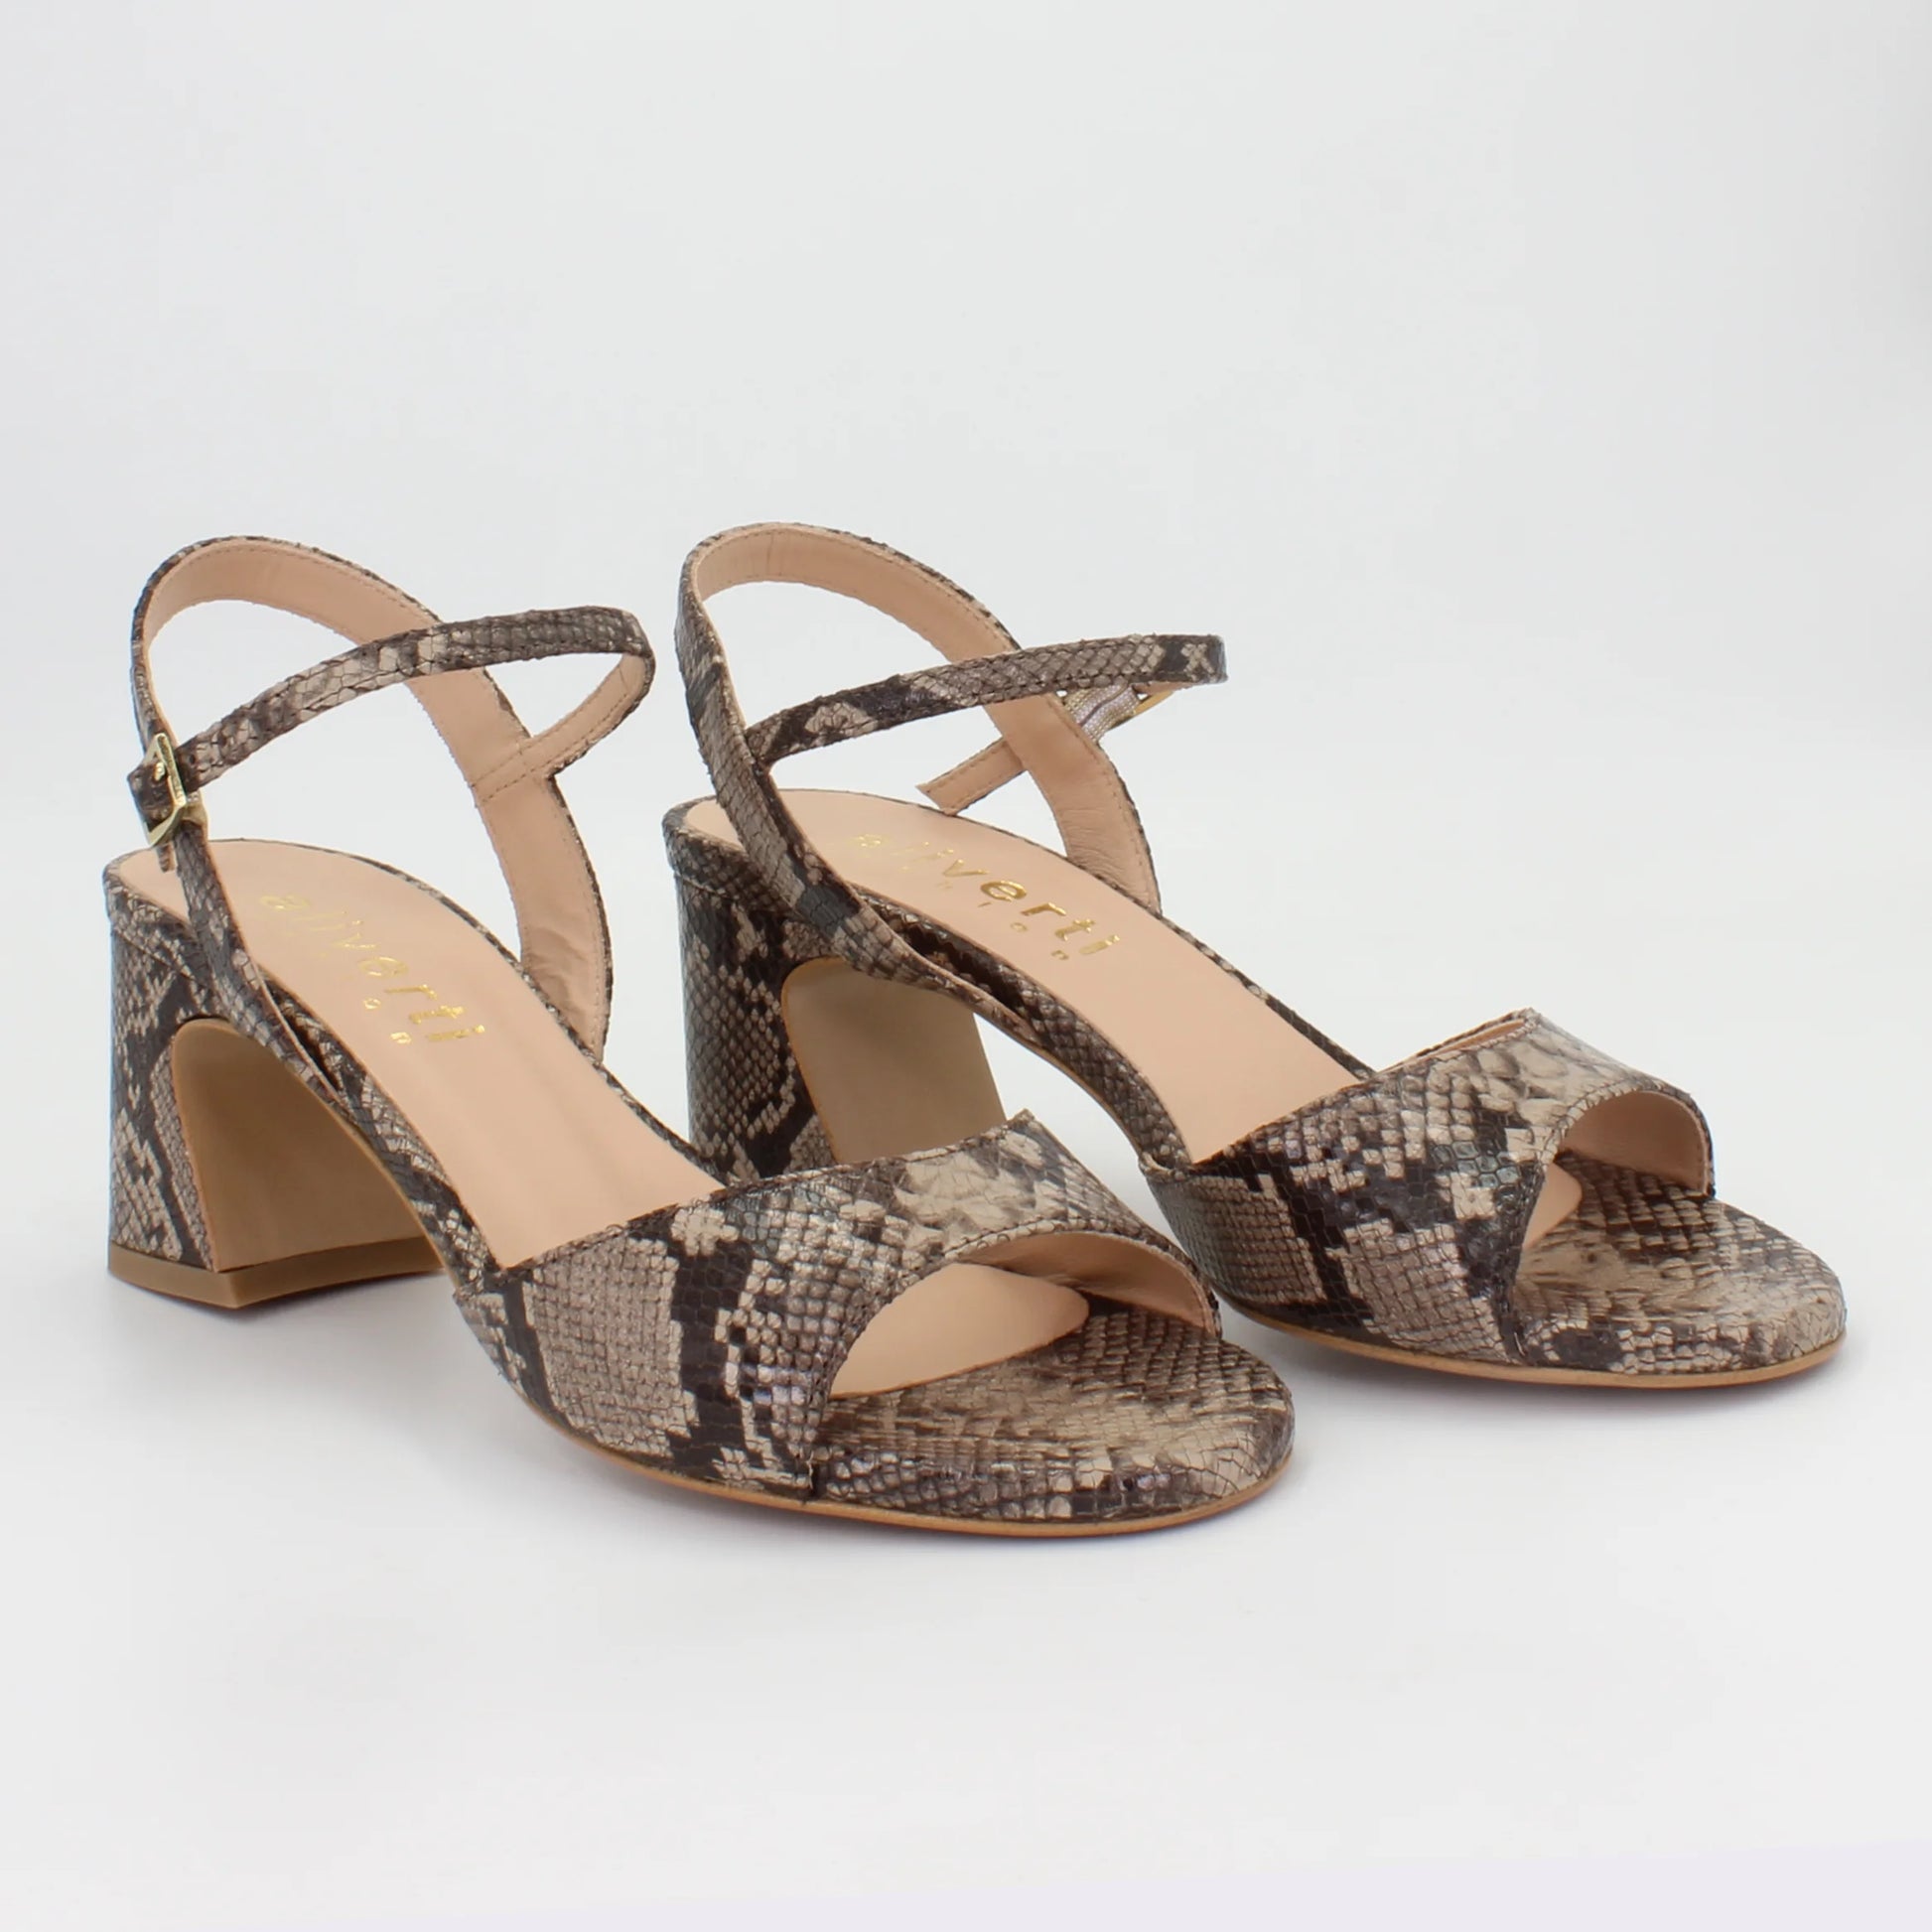 Shop Handmade Italian Leather block heel in nemesis taupe (ALETA 5) or browse our range of hand-made Italian shoes in leather or suede in-store at Aliverti Cape Town, or shop online. We deliver in South Africa & offer multiple payment plans as well as accept multiple safe & secure payment methods.